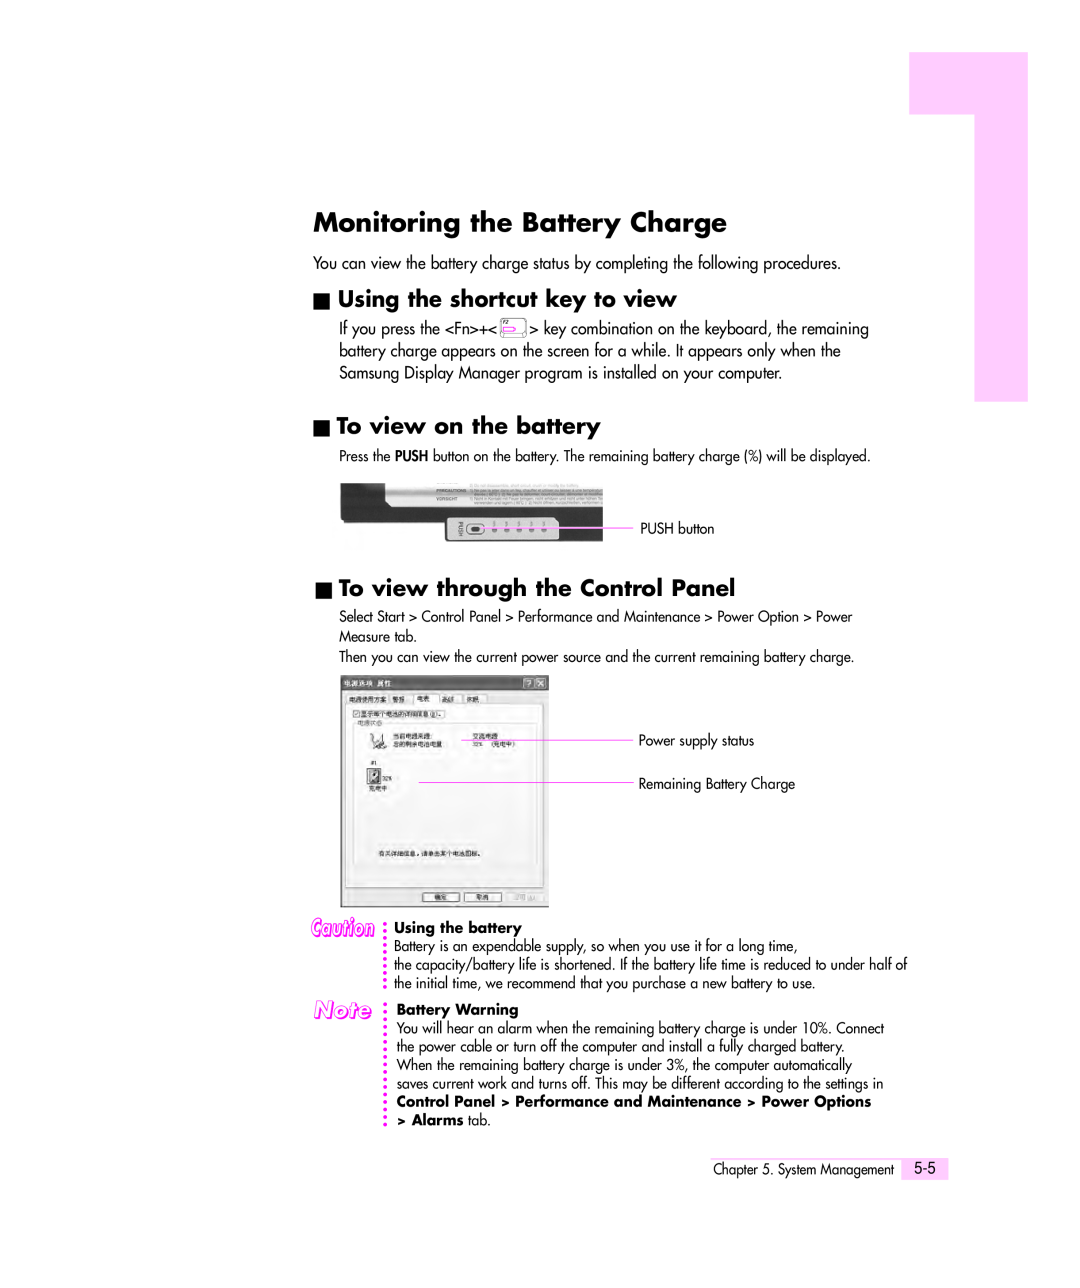 Samsung Q35 manual Monitoring the Battery Charge, Using the shortcut key to view, To view on the battery, Using the battery 